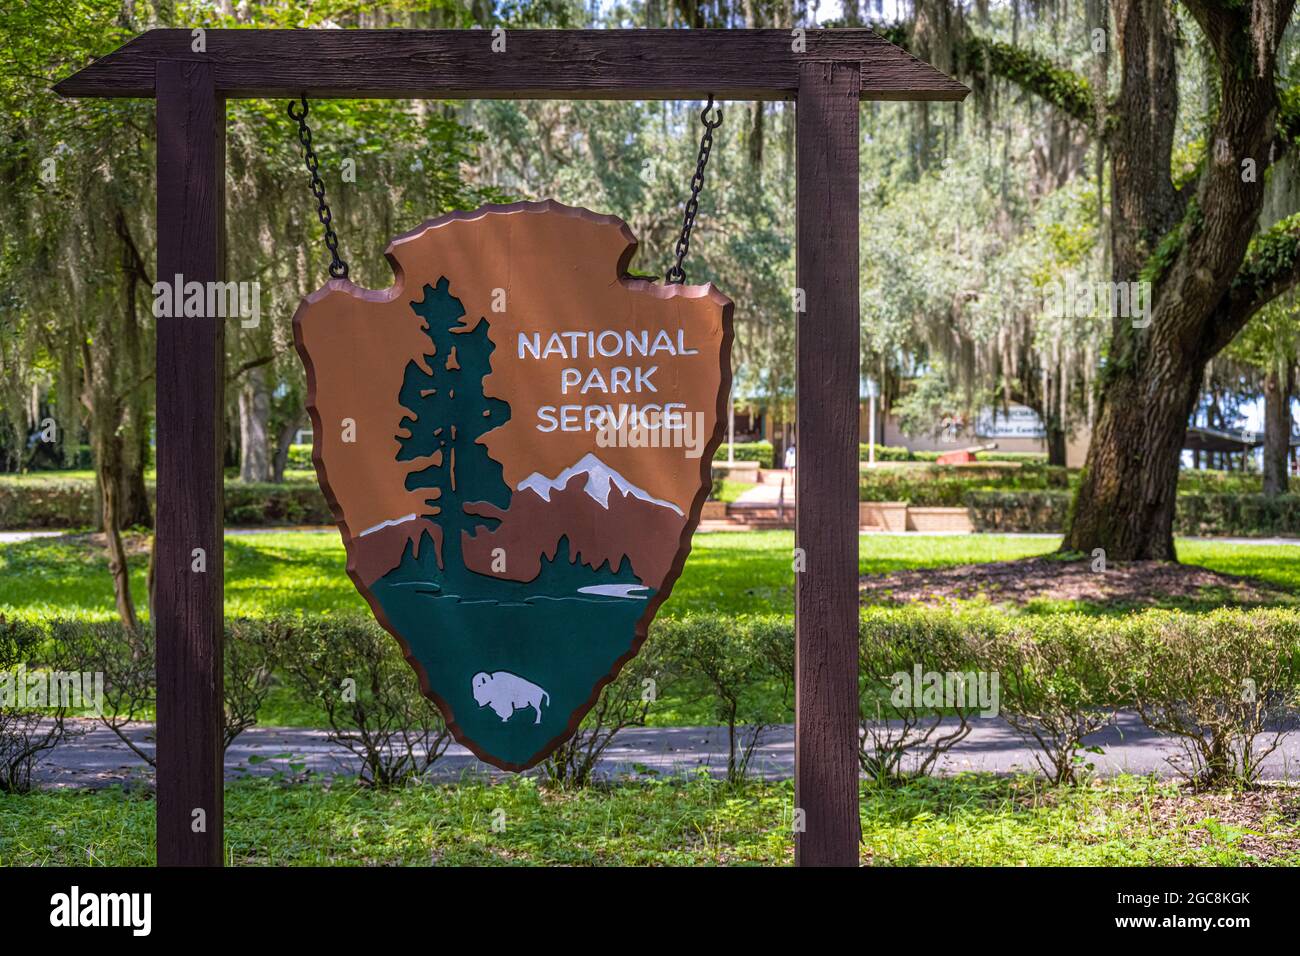 National Park Service sign at the Timucuan Ecological and Historical Preserve Visitor Center at Fort Caroline National Memorial in Jacksonville, FL. Stock Photo